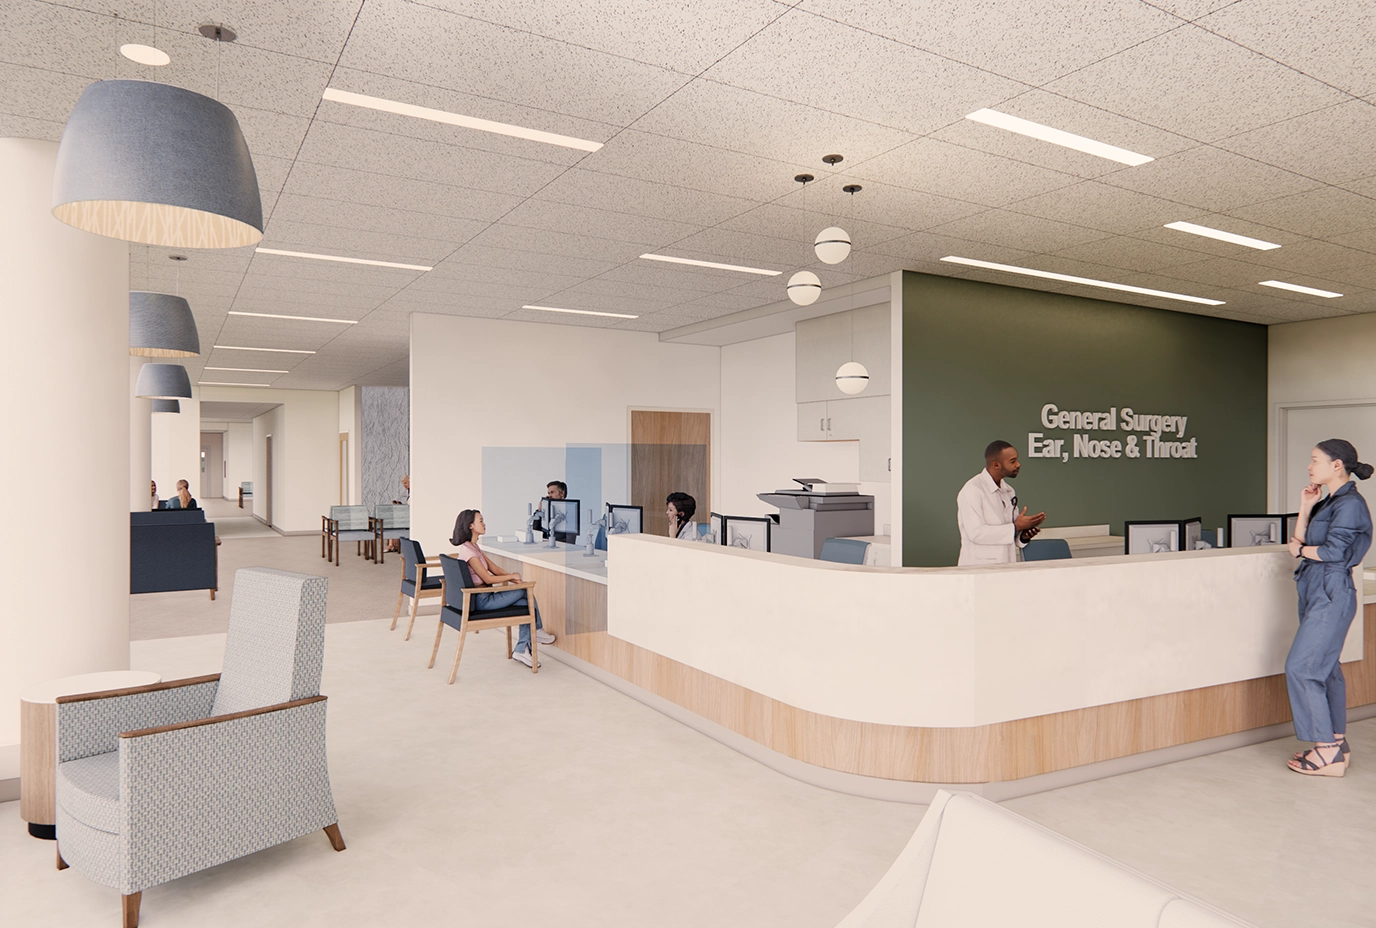 Rendering of the patient check in area and front desk